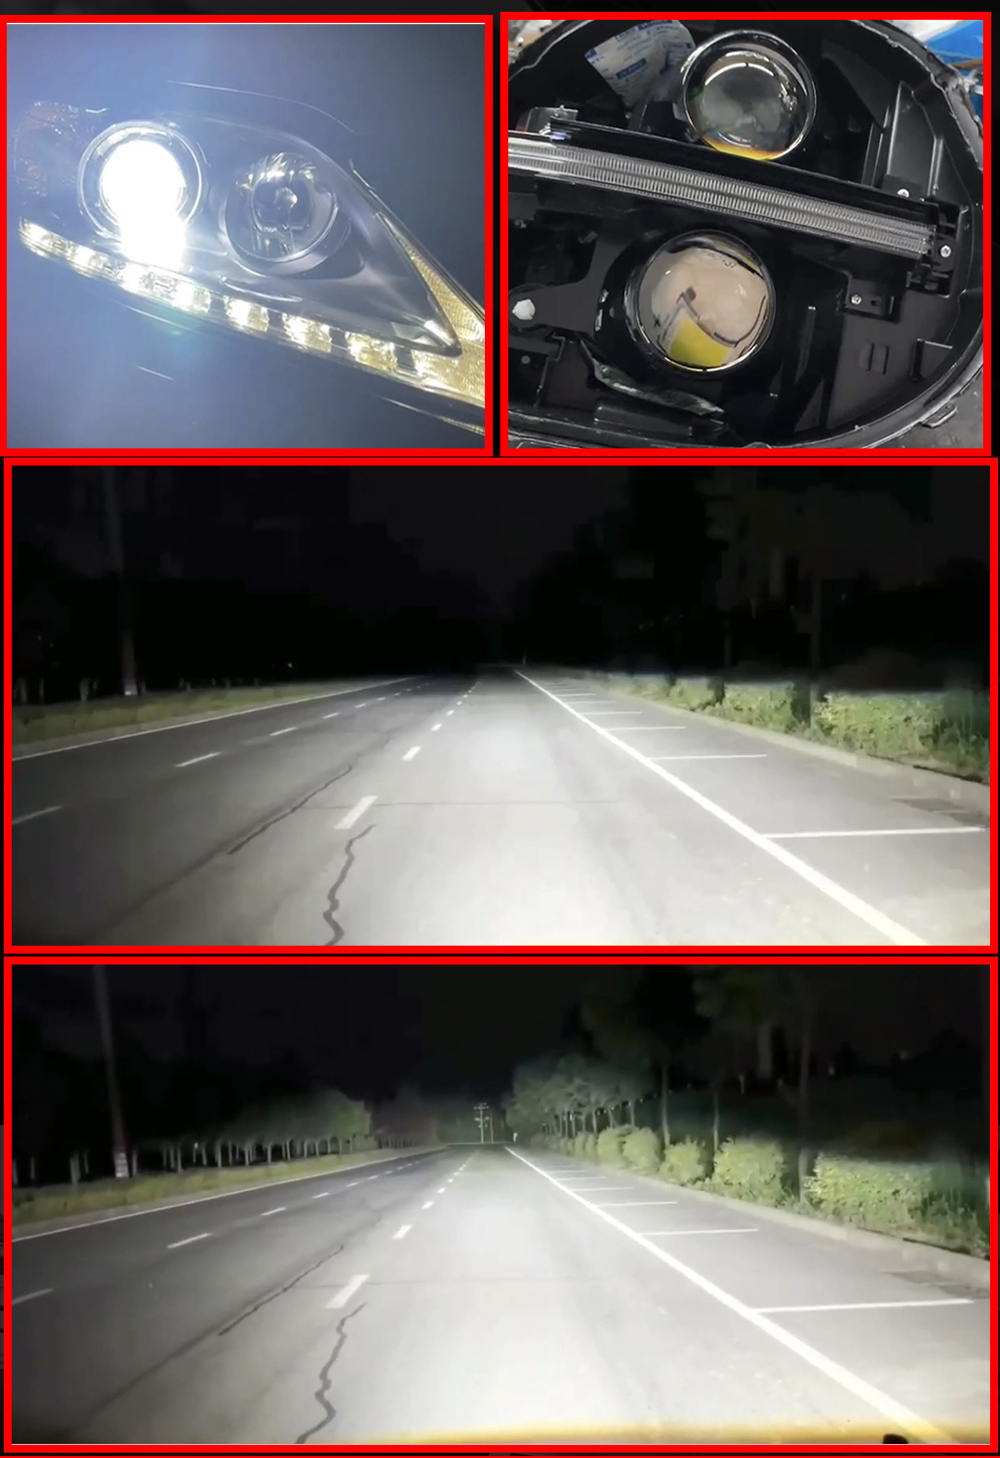 Factory Customize OEM ODM 3 Inch F50 LED Projector Lens Headlights 115w 5500k Super Bright Automotive Headlight Bulb All Fitting for Car and Motorcycle  